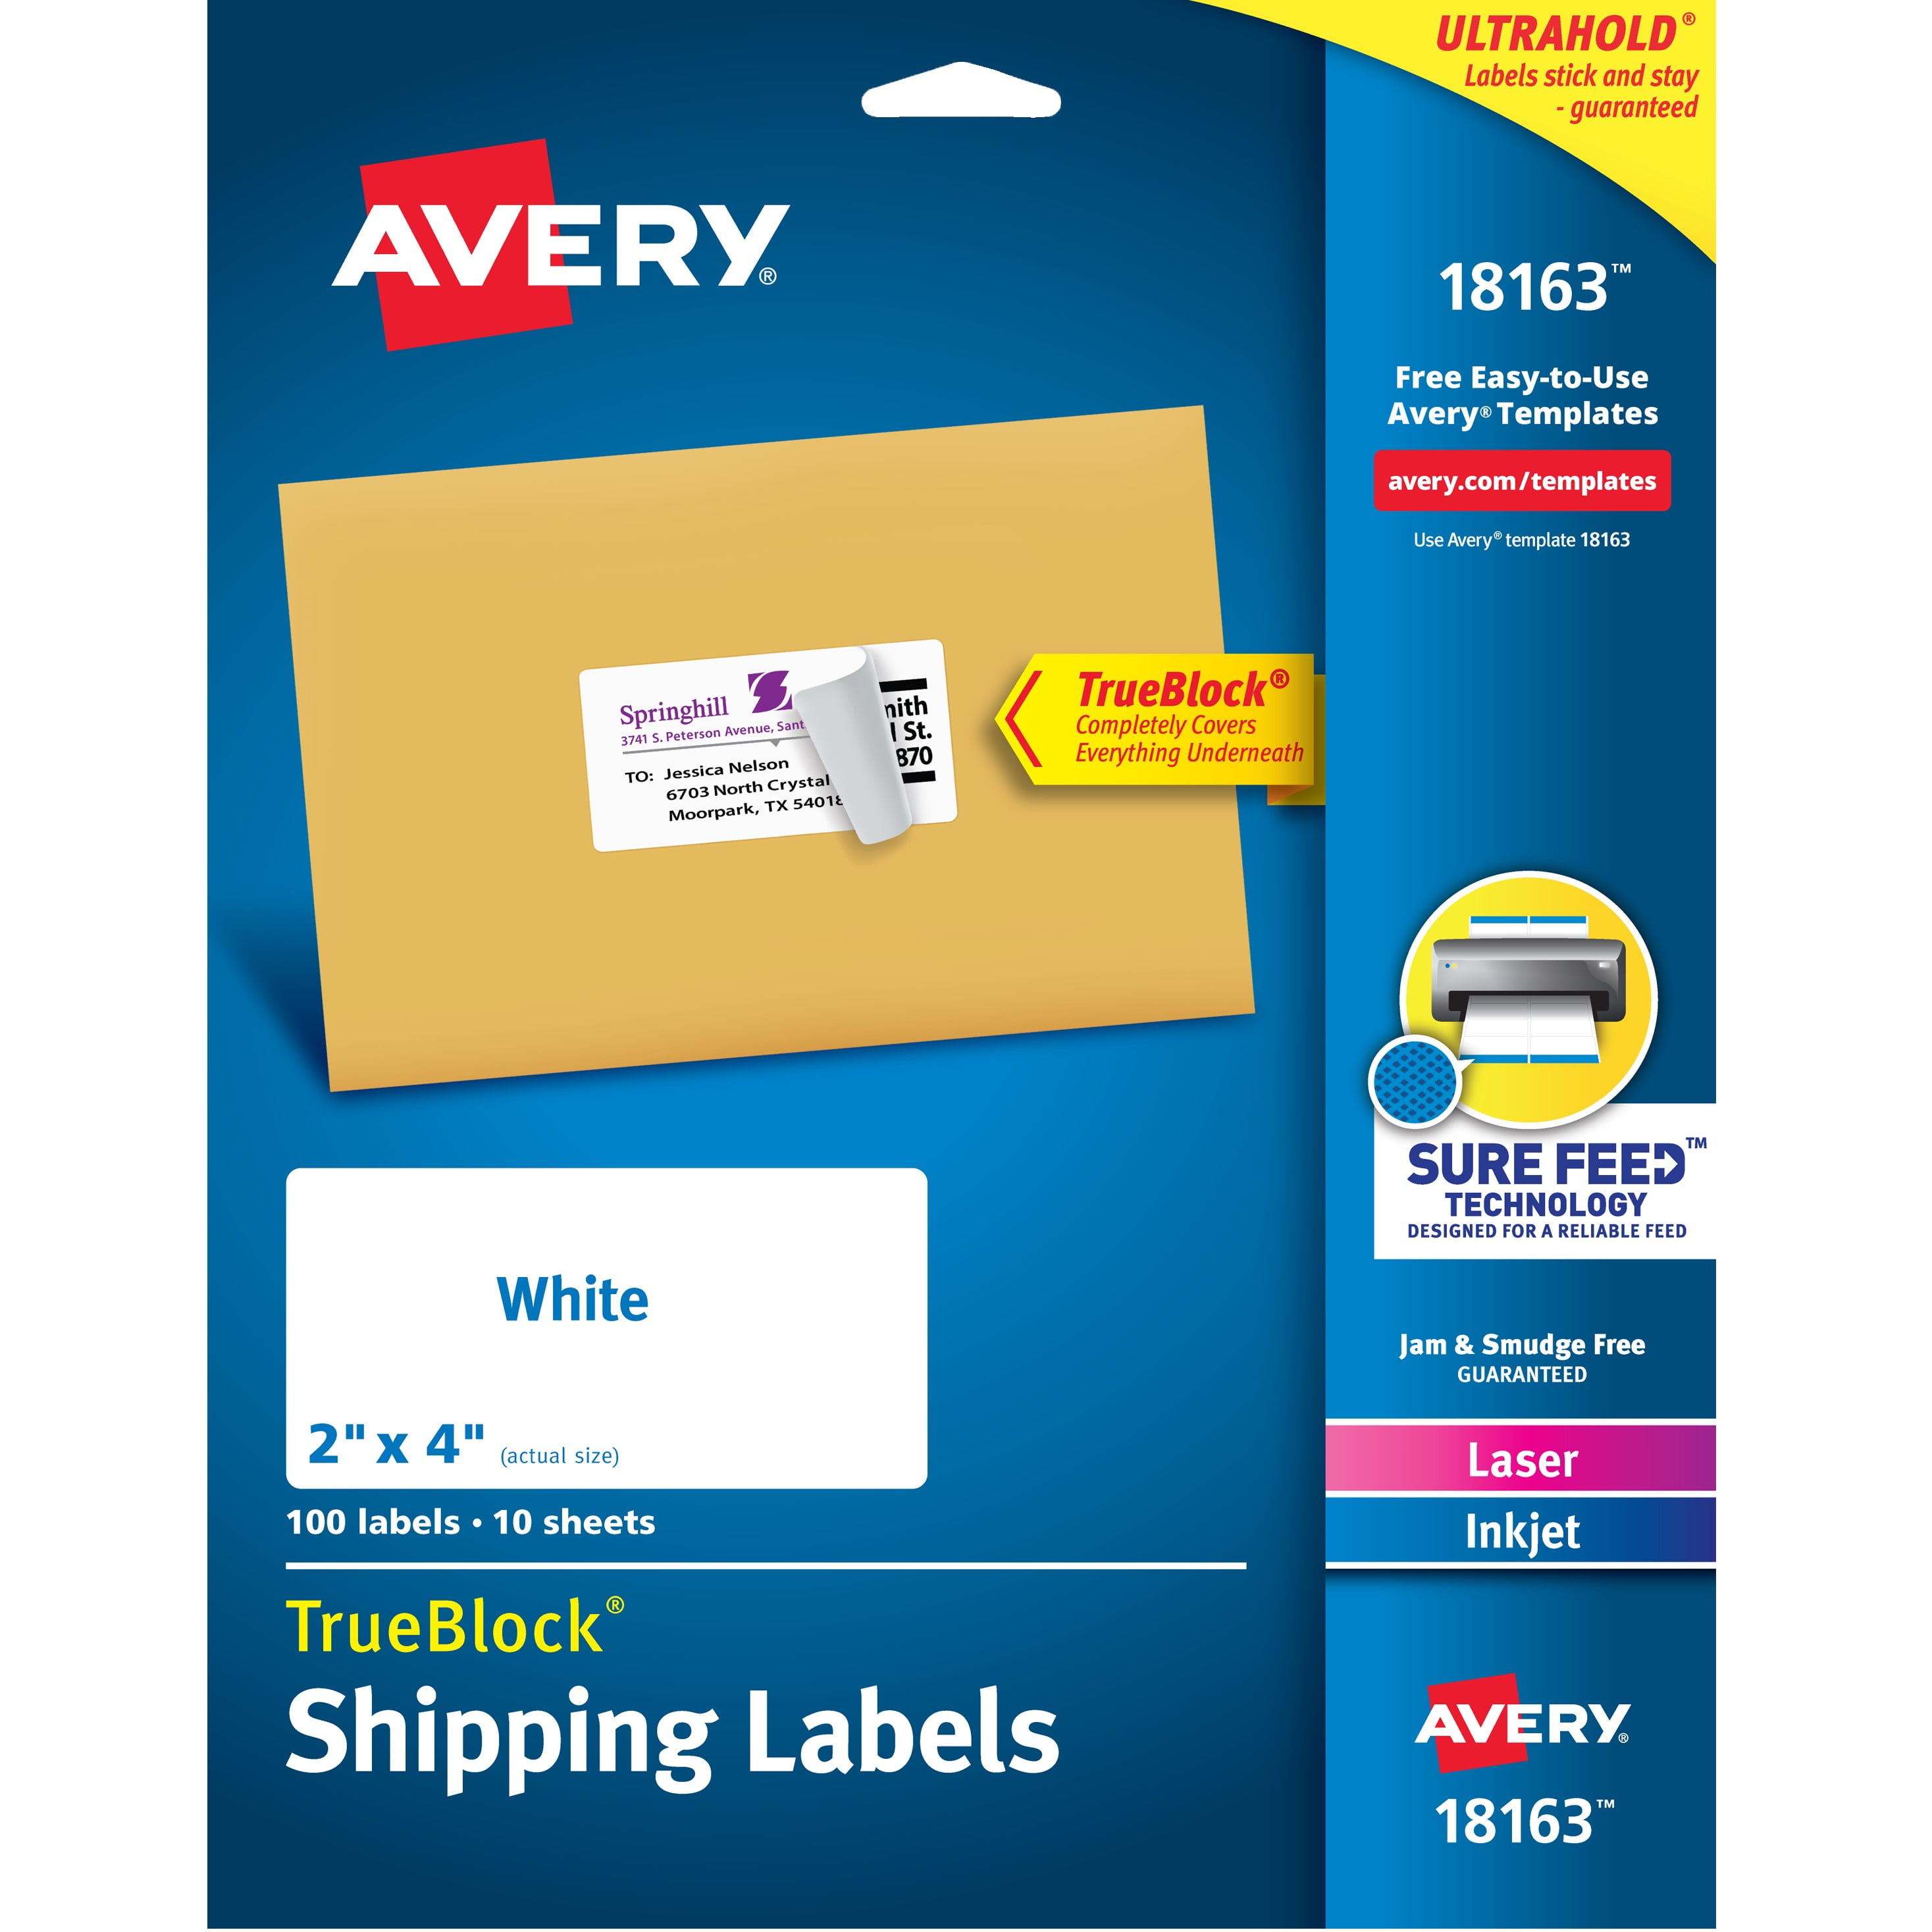 Avery Shipping Labels, White, 2" x 4", Sure Feed, Laser, Inkjet, 100 Labels (18163)